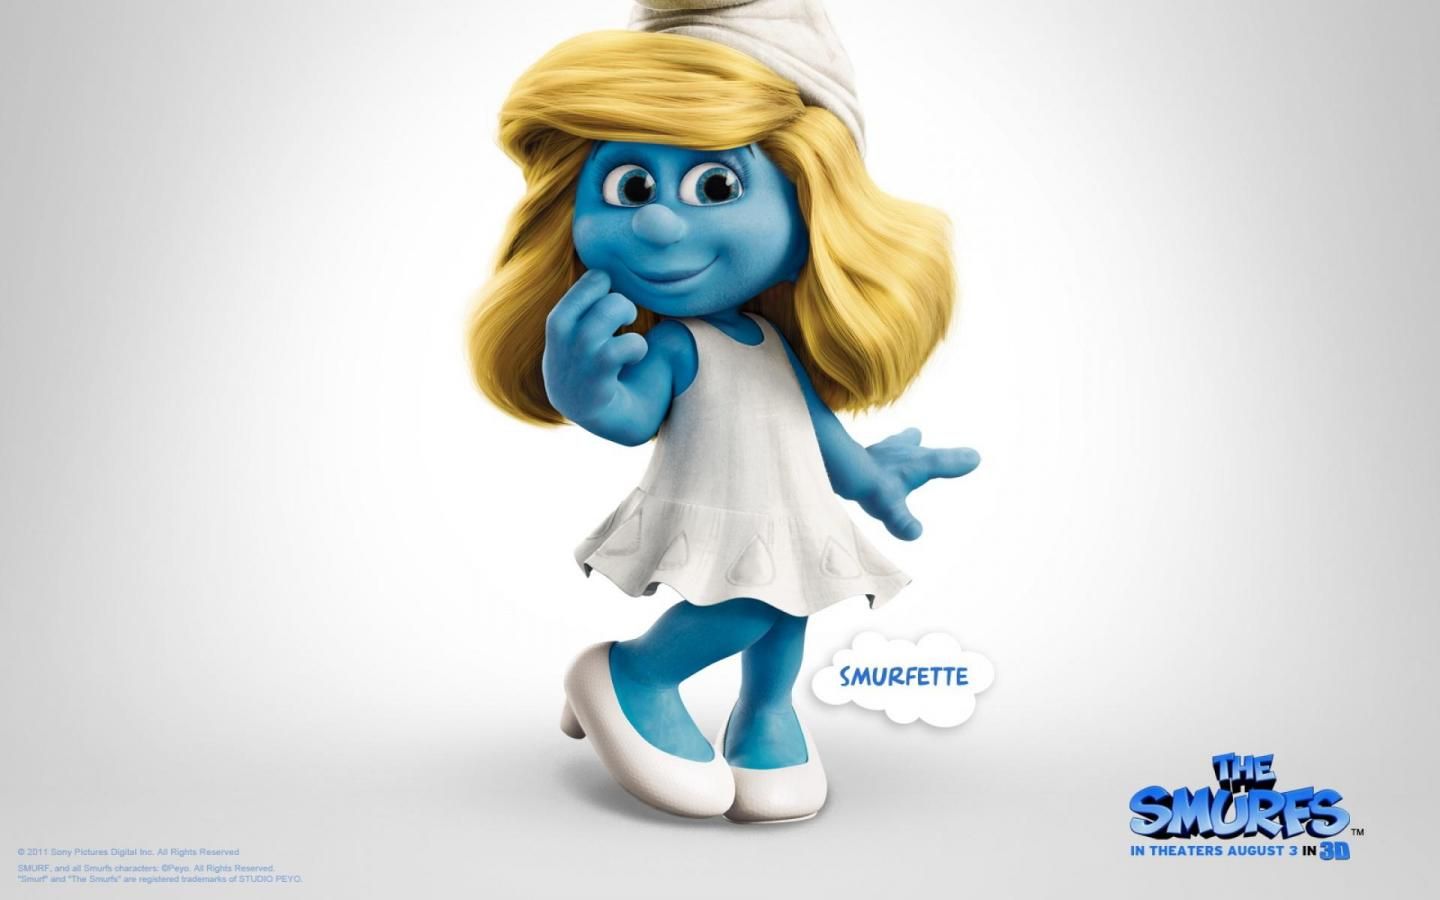 smurfs pictures to download Wallpapers - Free smurfs pictures to ...